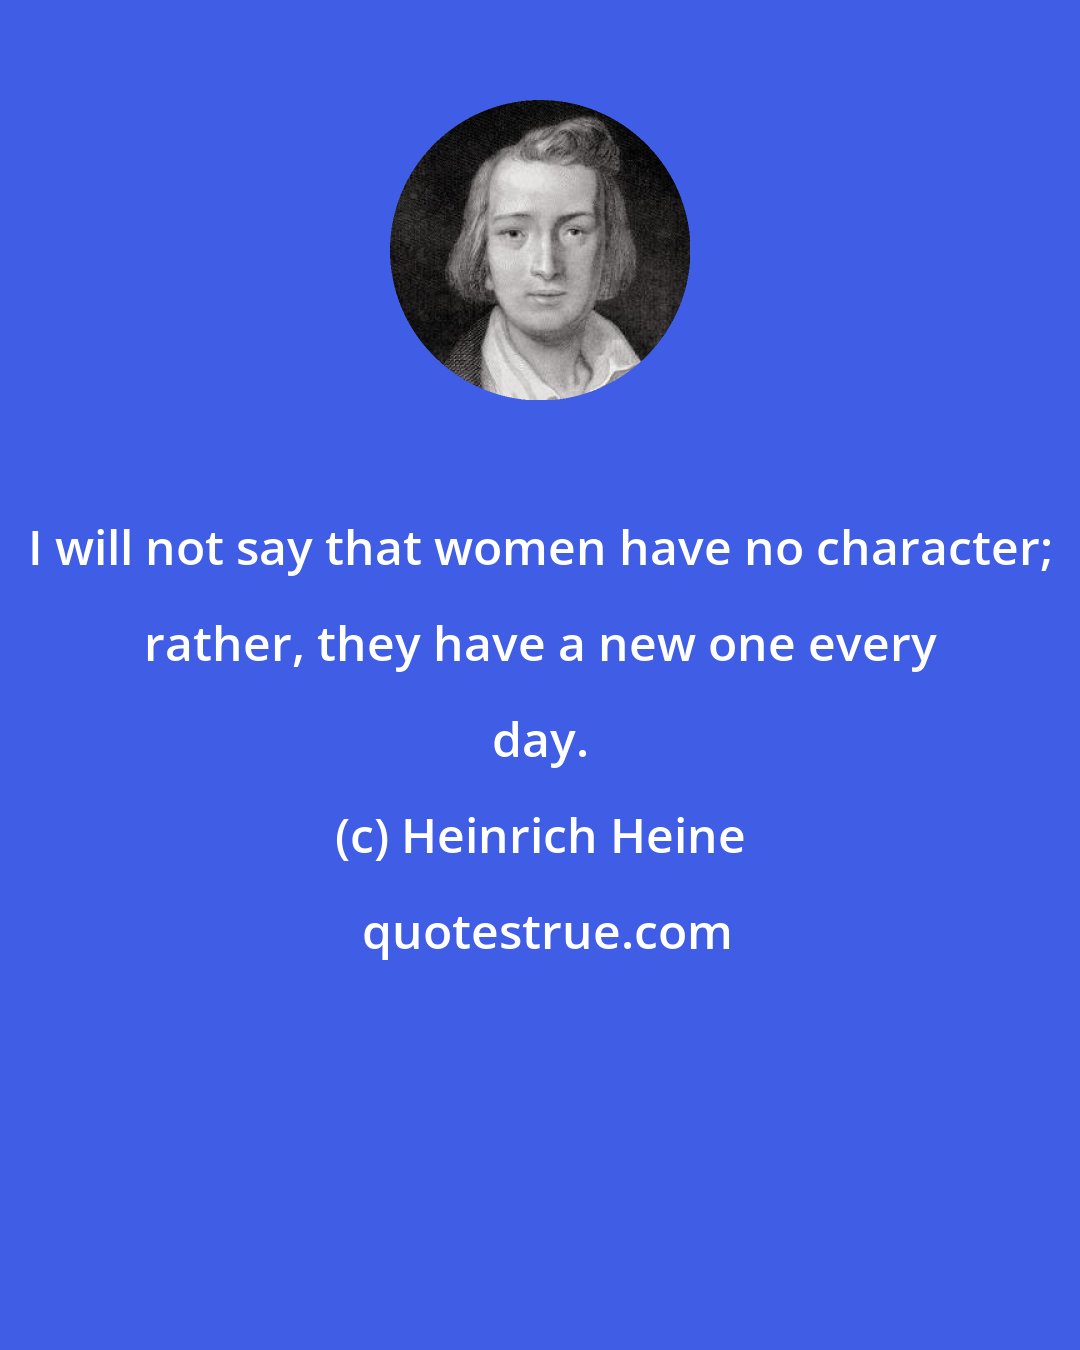 Heinrich Heine: I will not say that women have no character; rather, they have a new one every day.